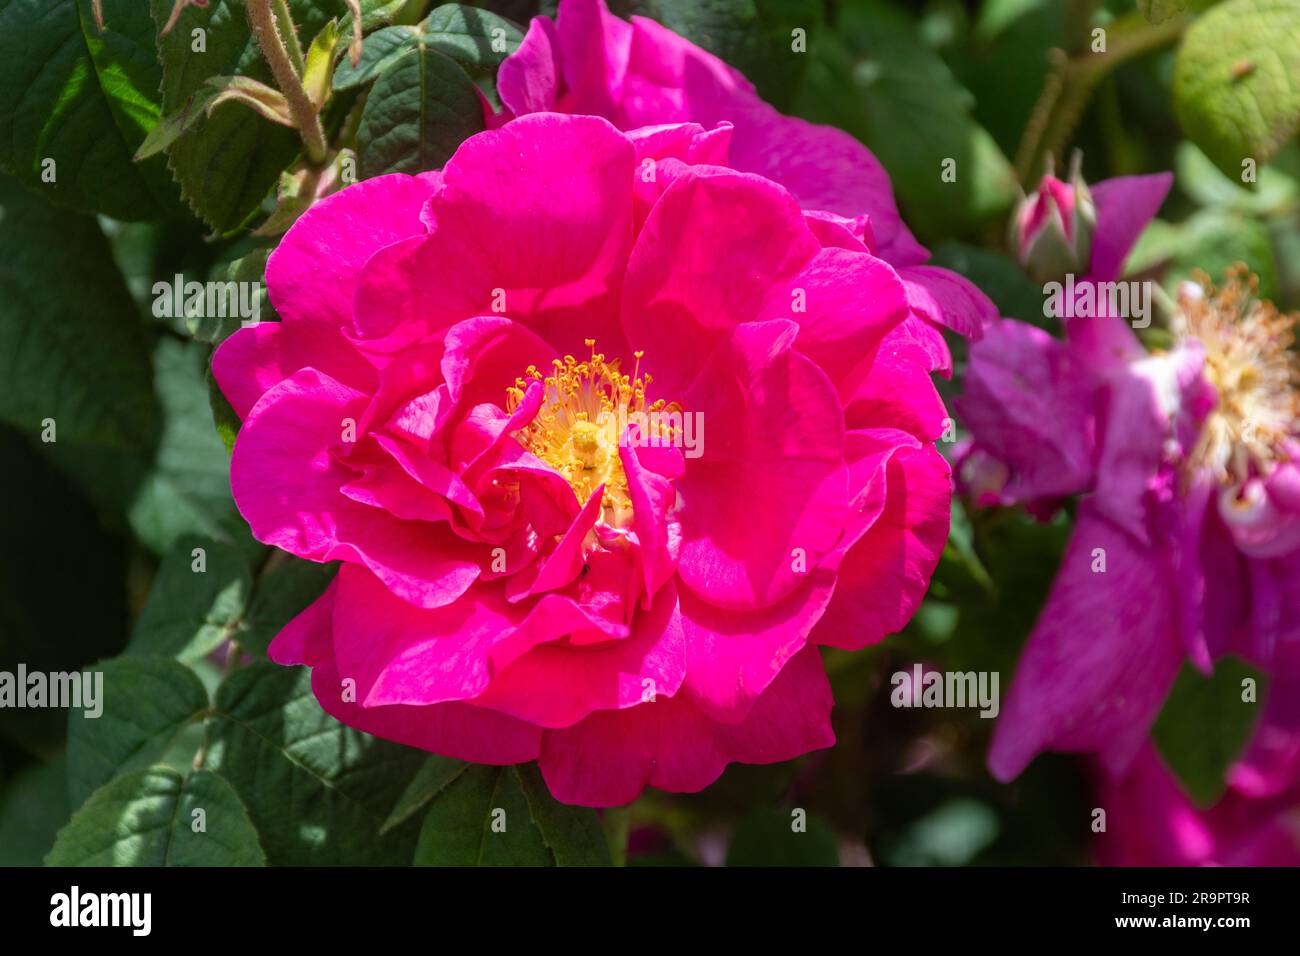 Rosa Gallica var. officinalis, also called Apothecary's rose, a pink semi-double rose flower in June or summer, England, UK Stock Photo